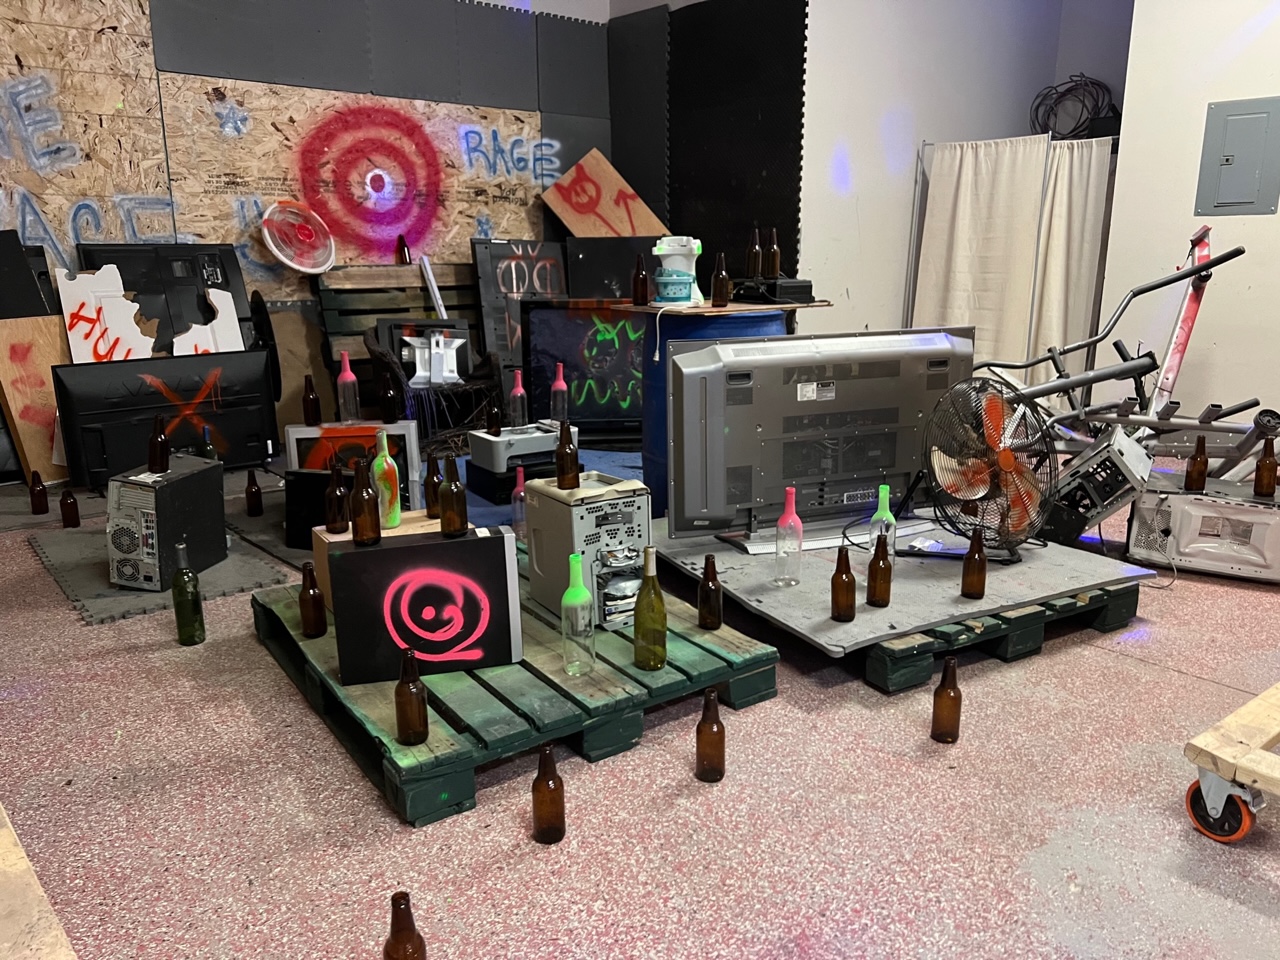 A full section of the warehouse at Rage Room Champaign has empty glass bottles, machines, and tvs for smashing. Photo by Alyssa Buckley.